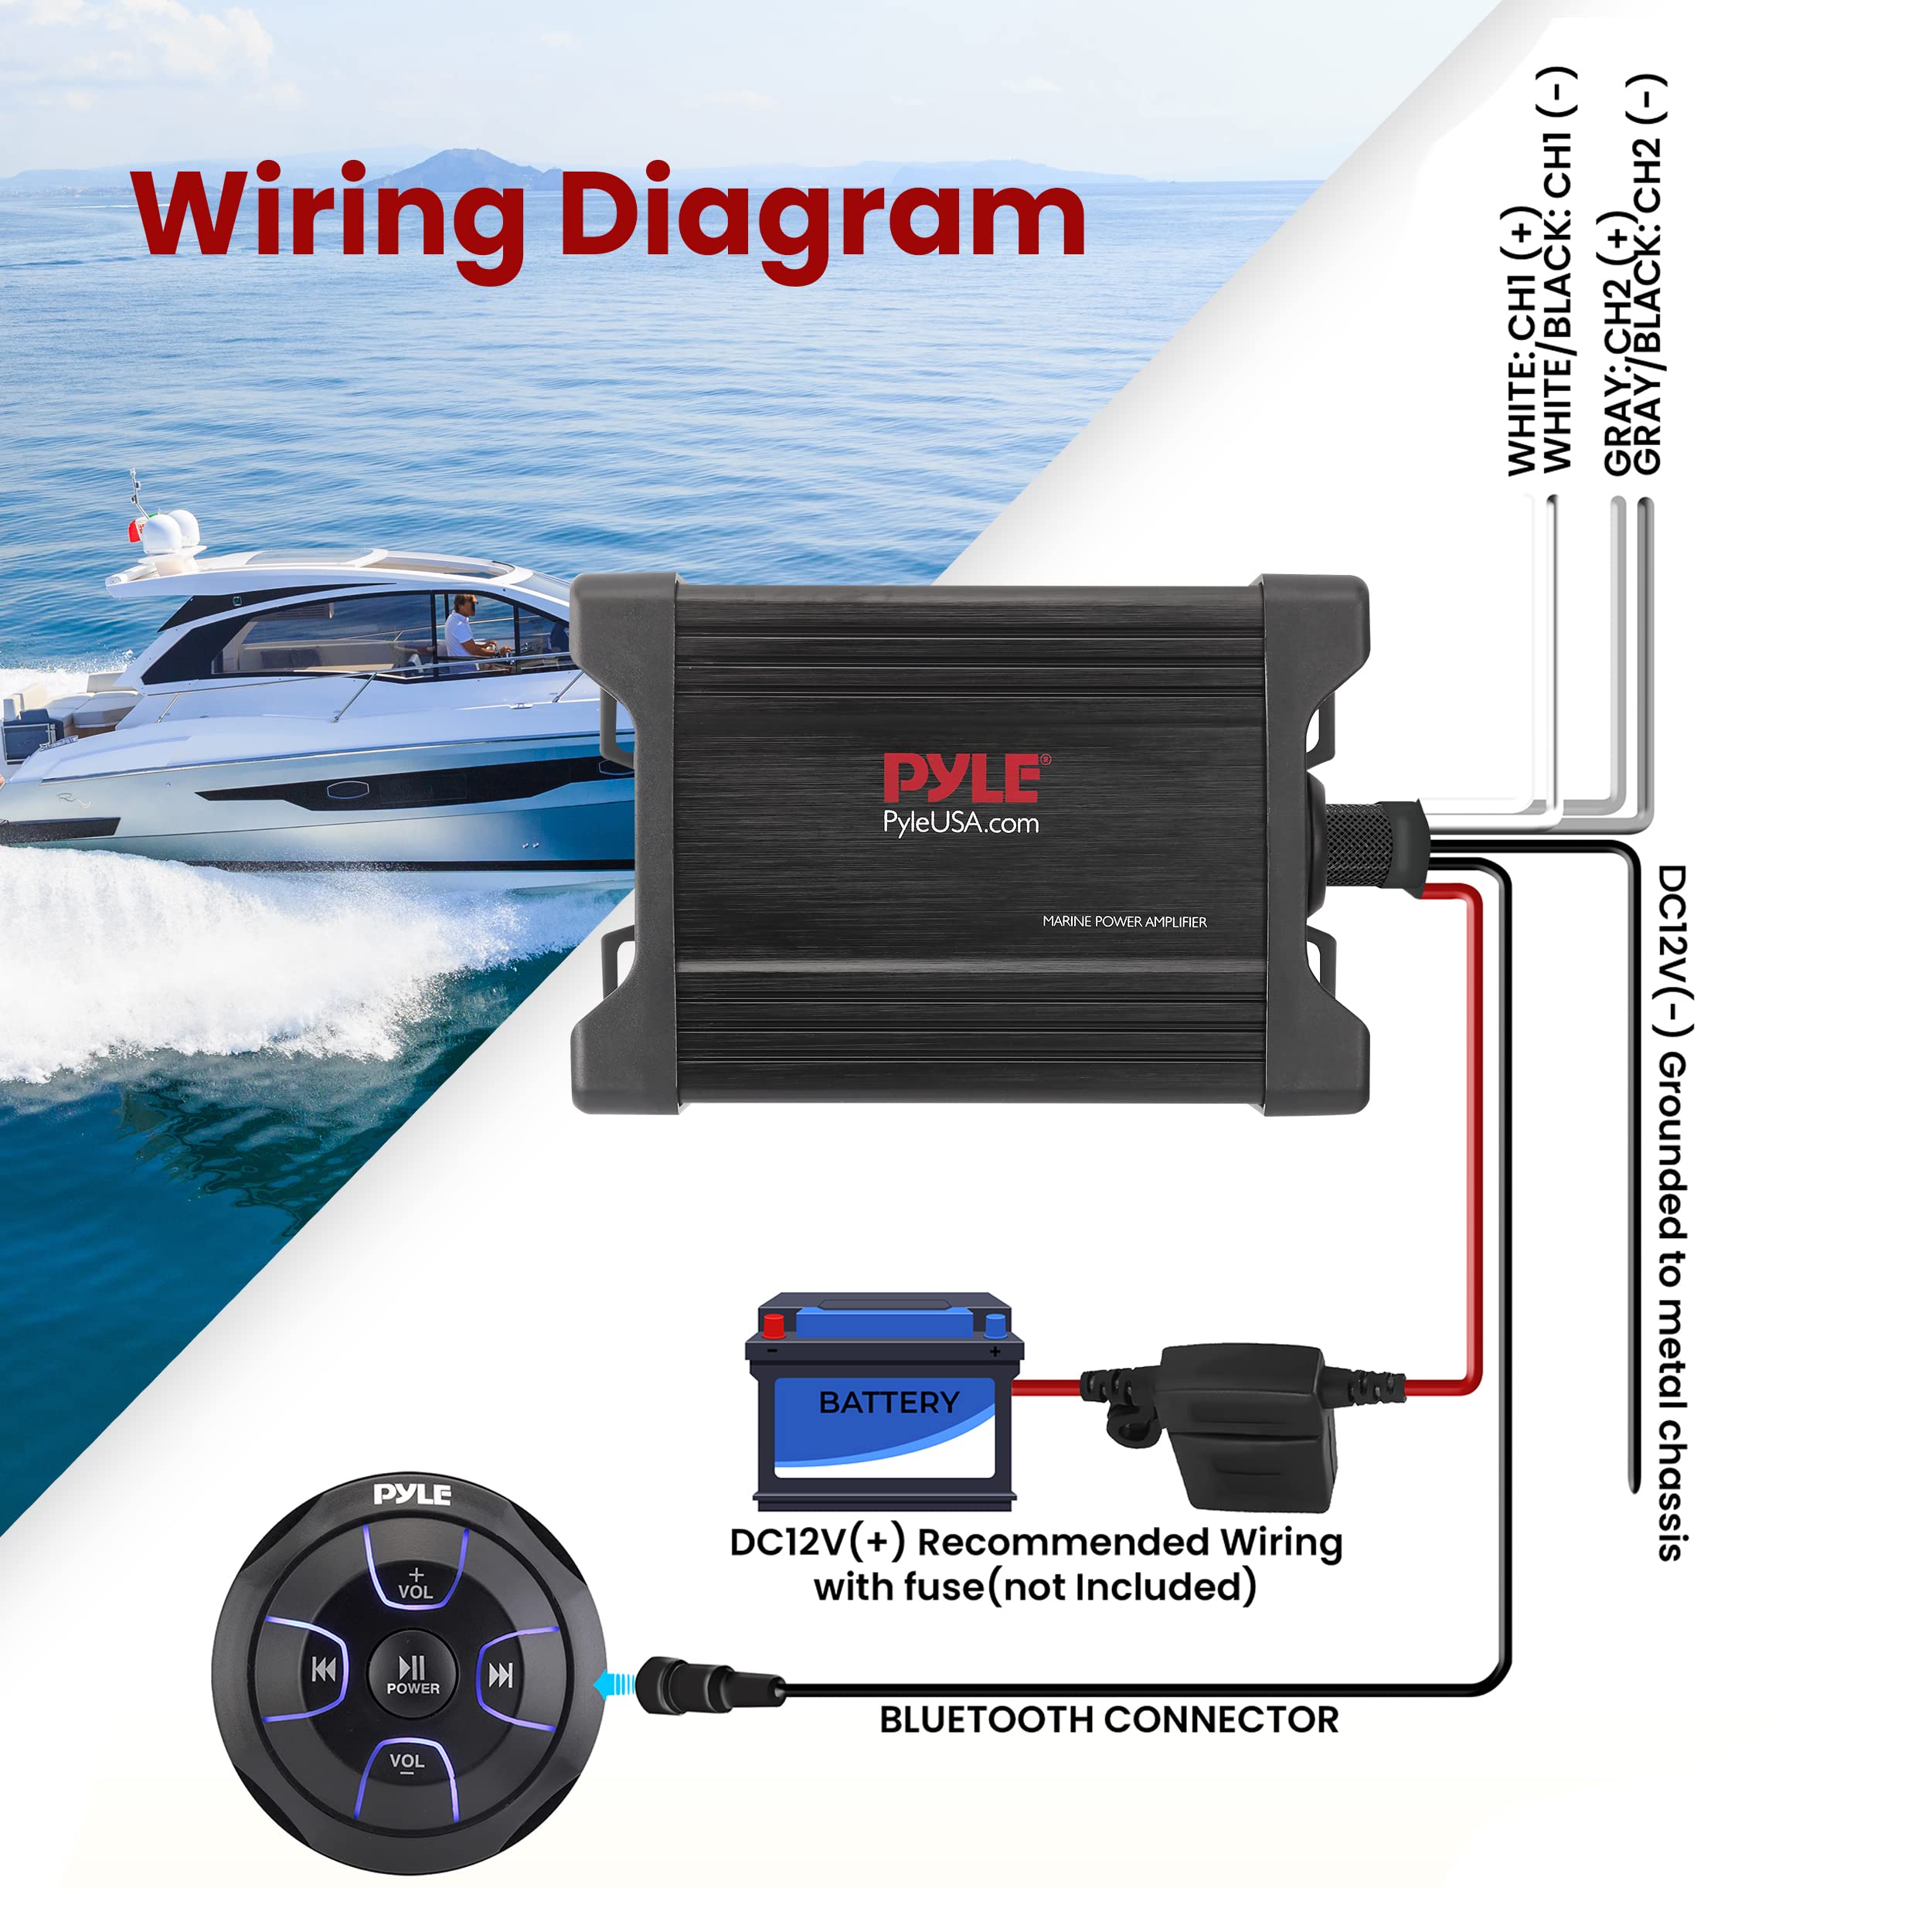 Waterproof Bluetooth Marine Amplifier Receiver - Weatherproof 2 Channel Wireless Amp for Stereo Speaker with 600 Watt Power, Wired RCA, AUX and MP3 Audio Input Cable - Pyle PLMRMBT5B (Black)